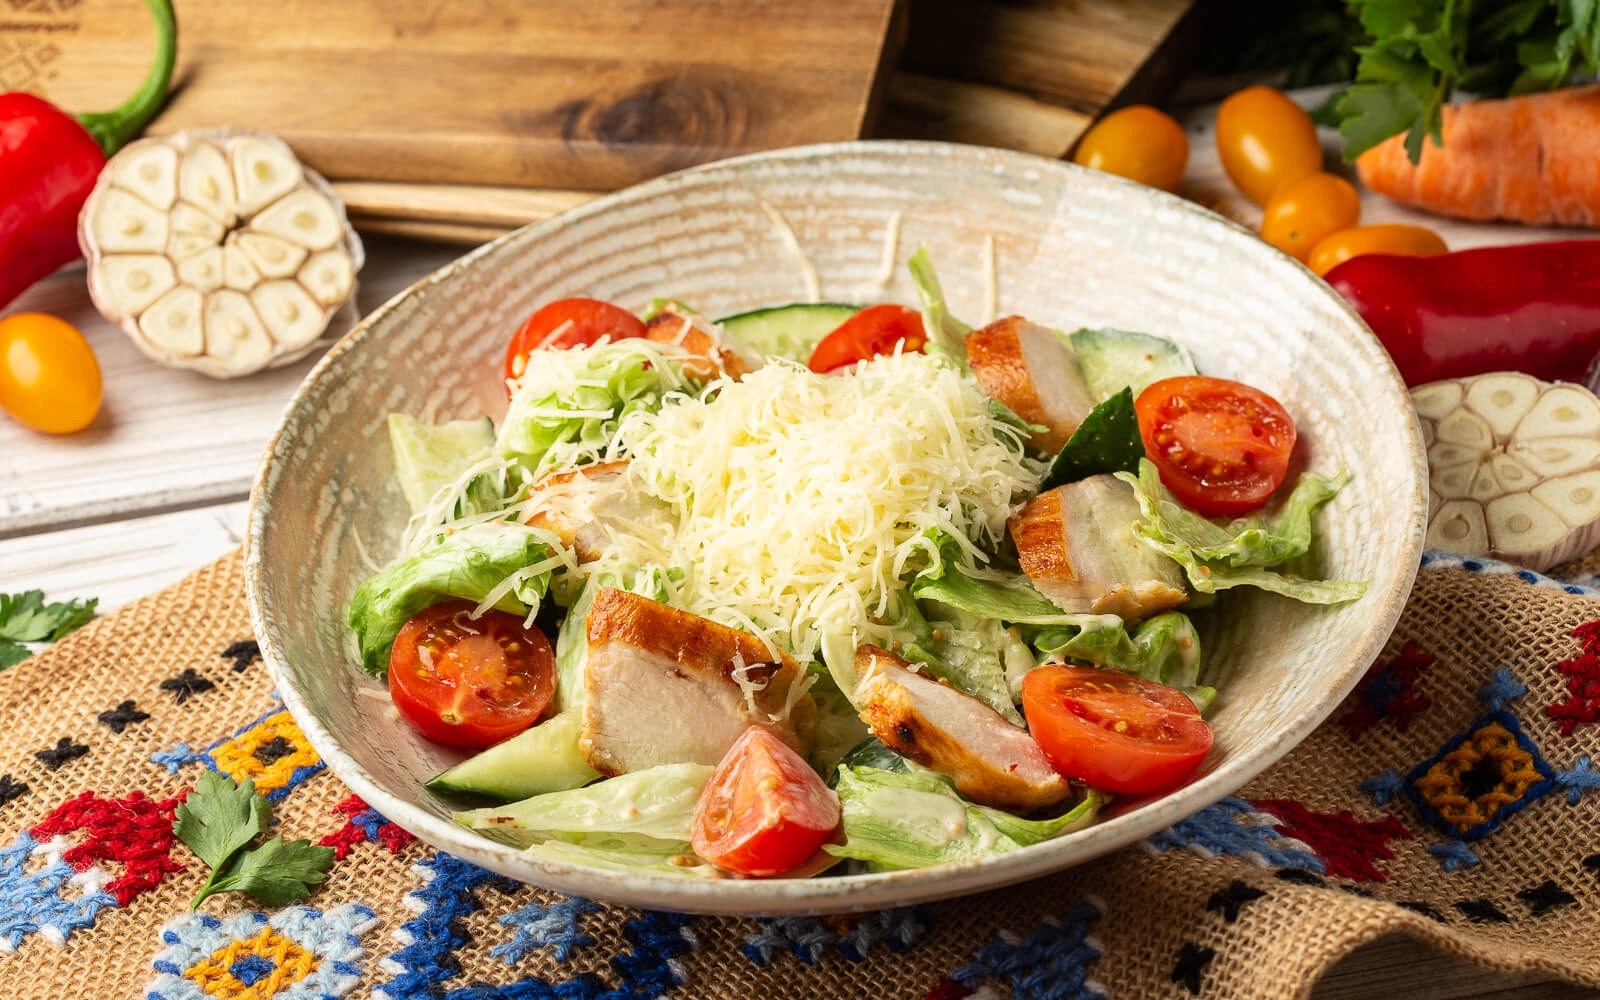 Tender salad with chicken breast